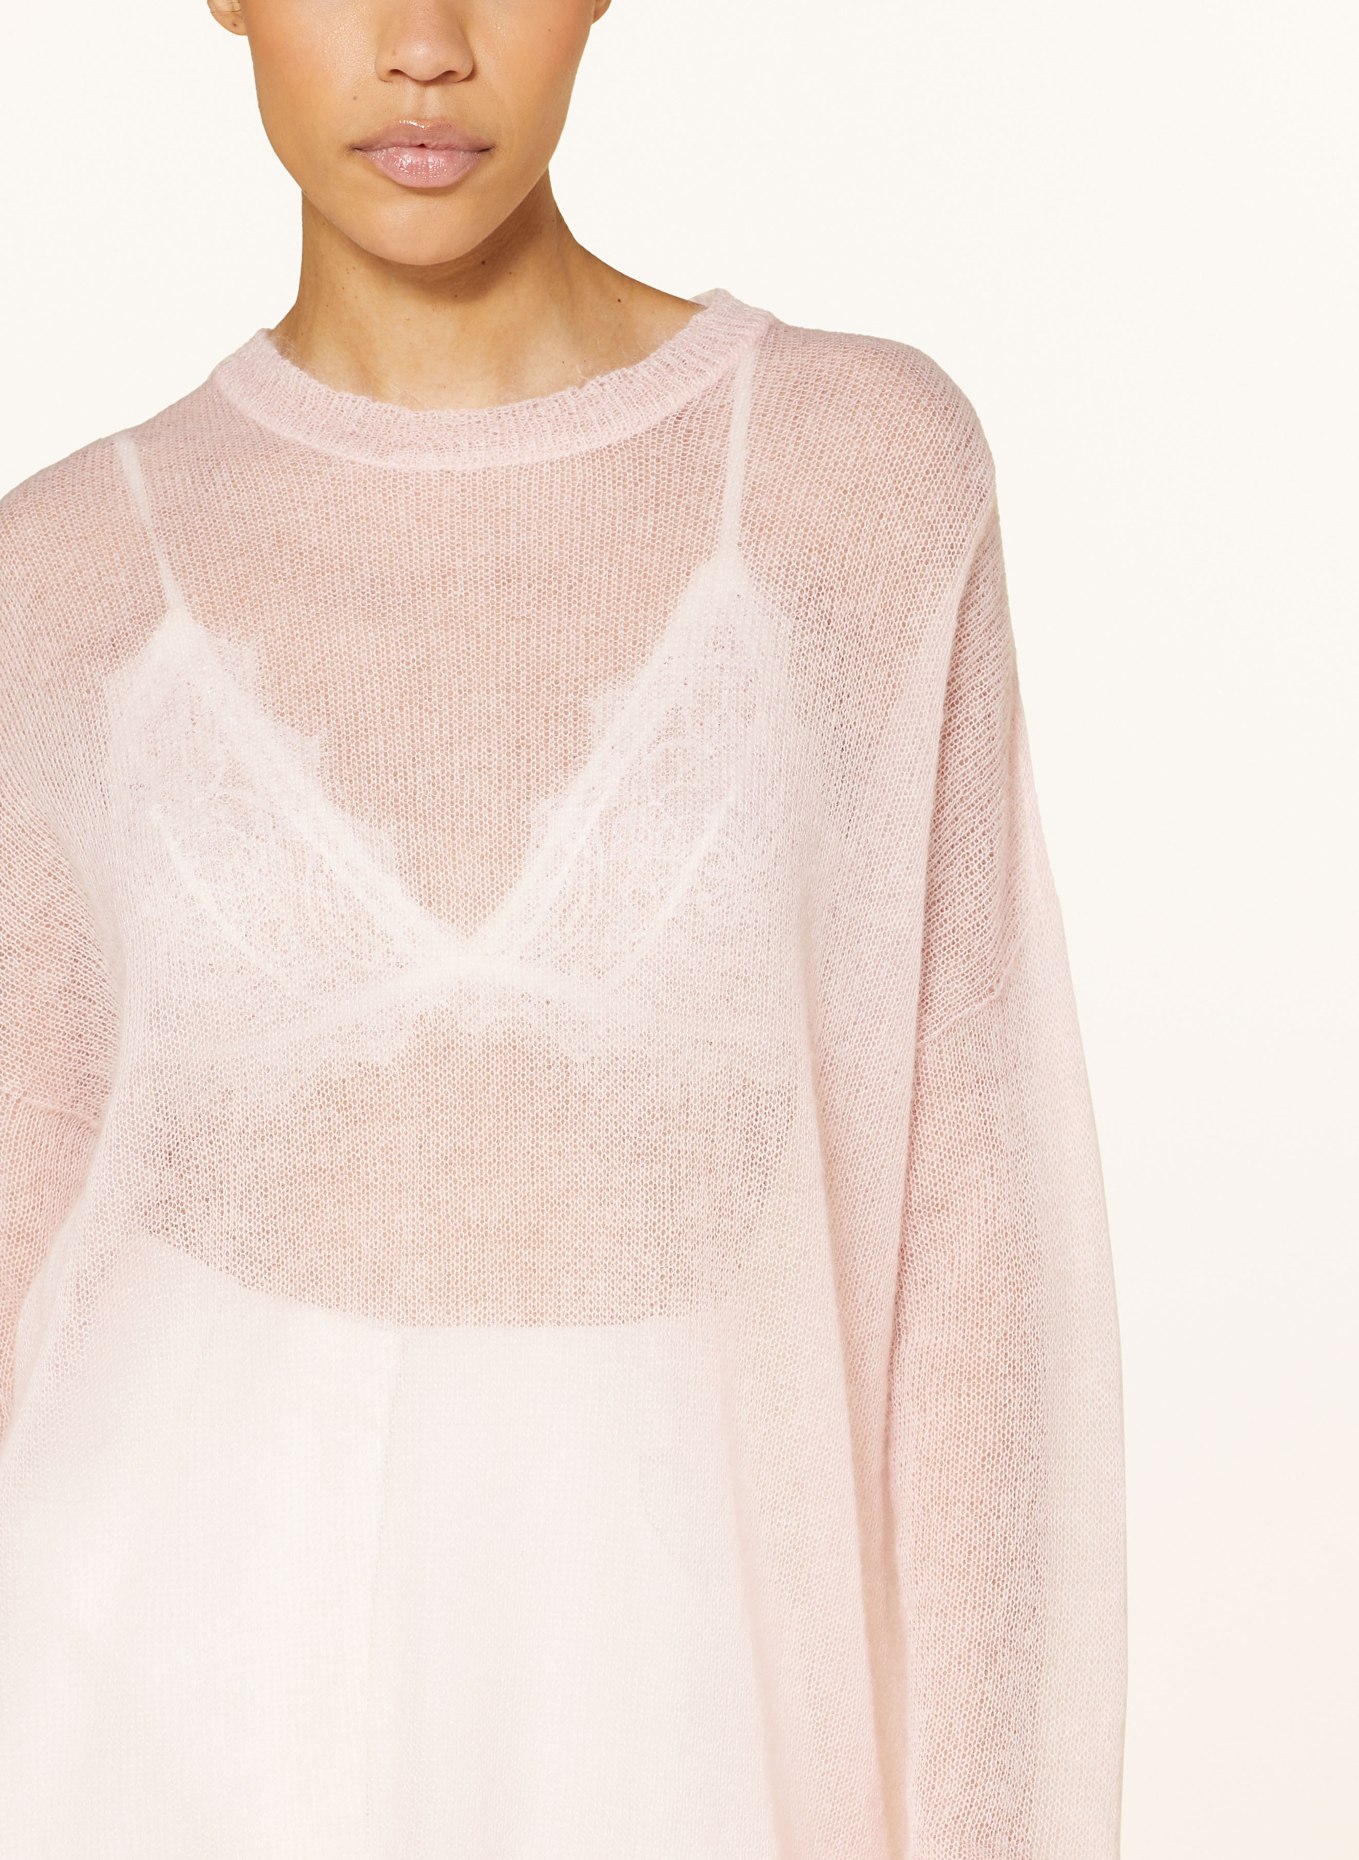 FABIANA FILIPPI Sweater with mohair, Color: LIGHT PINK (Image 4)